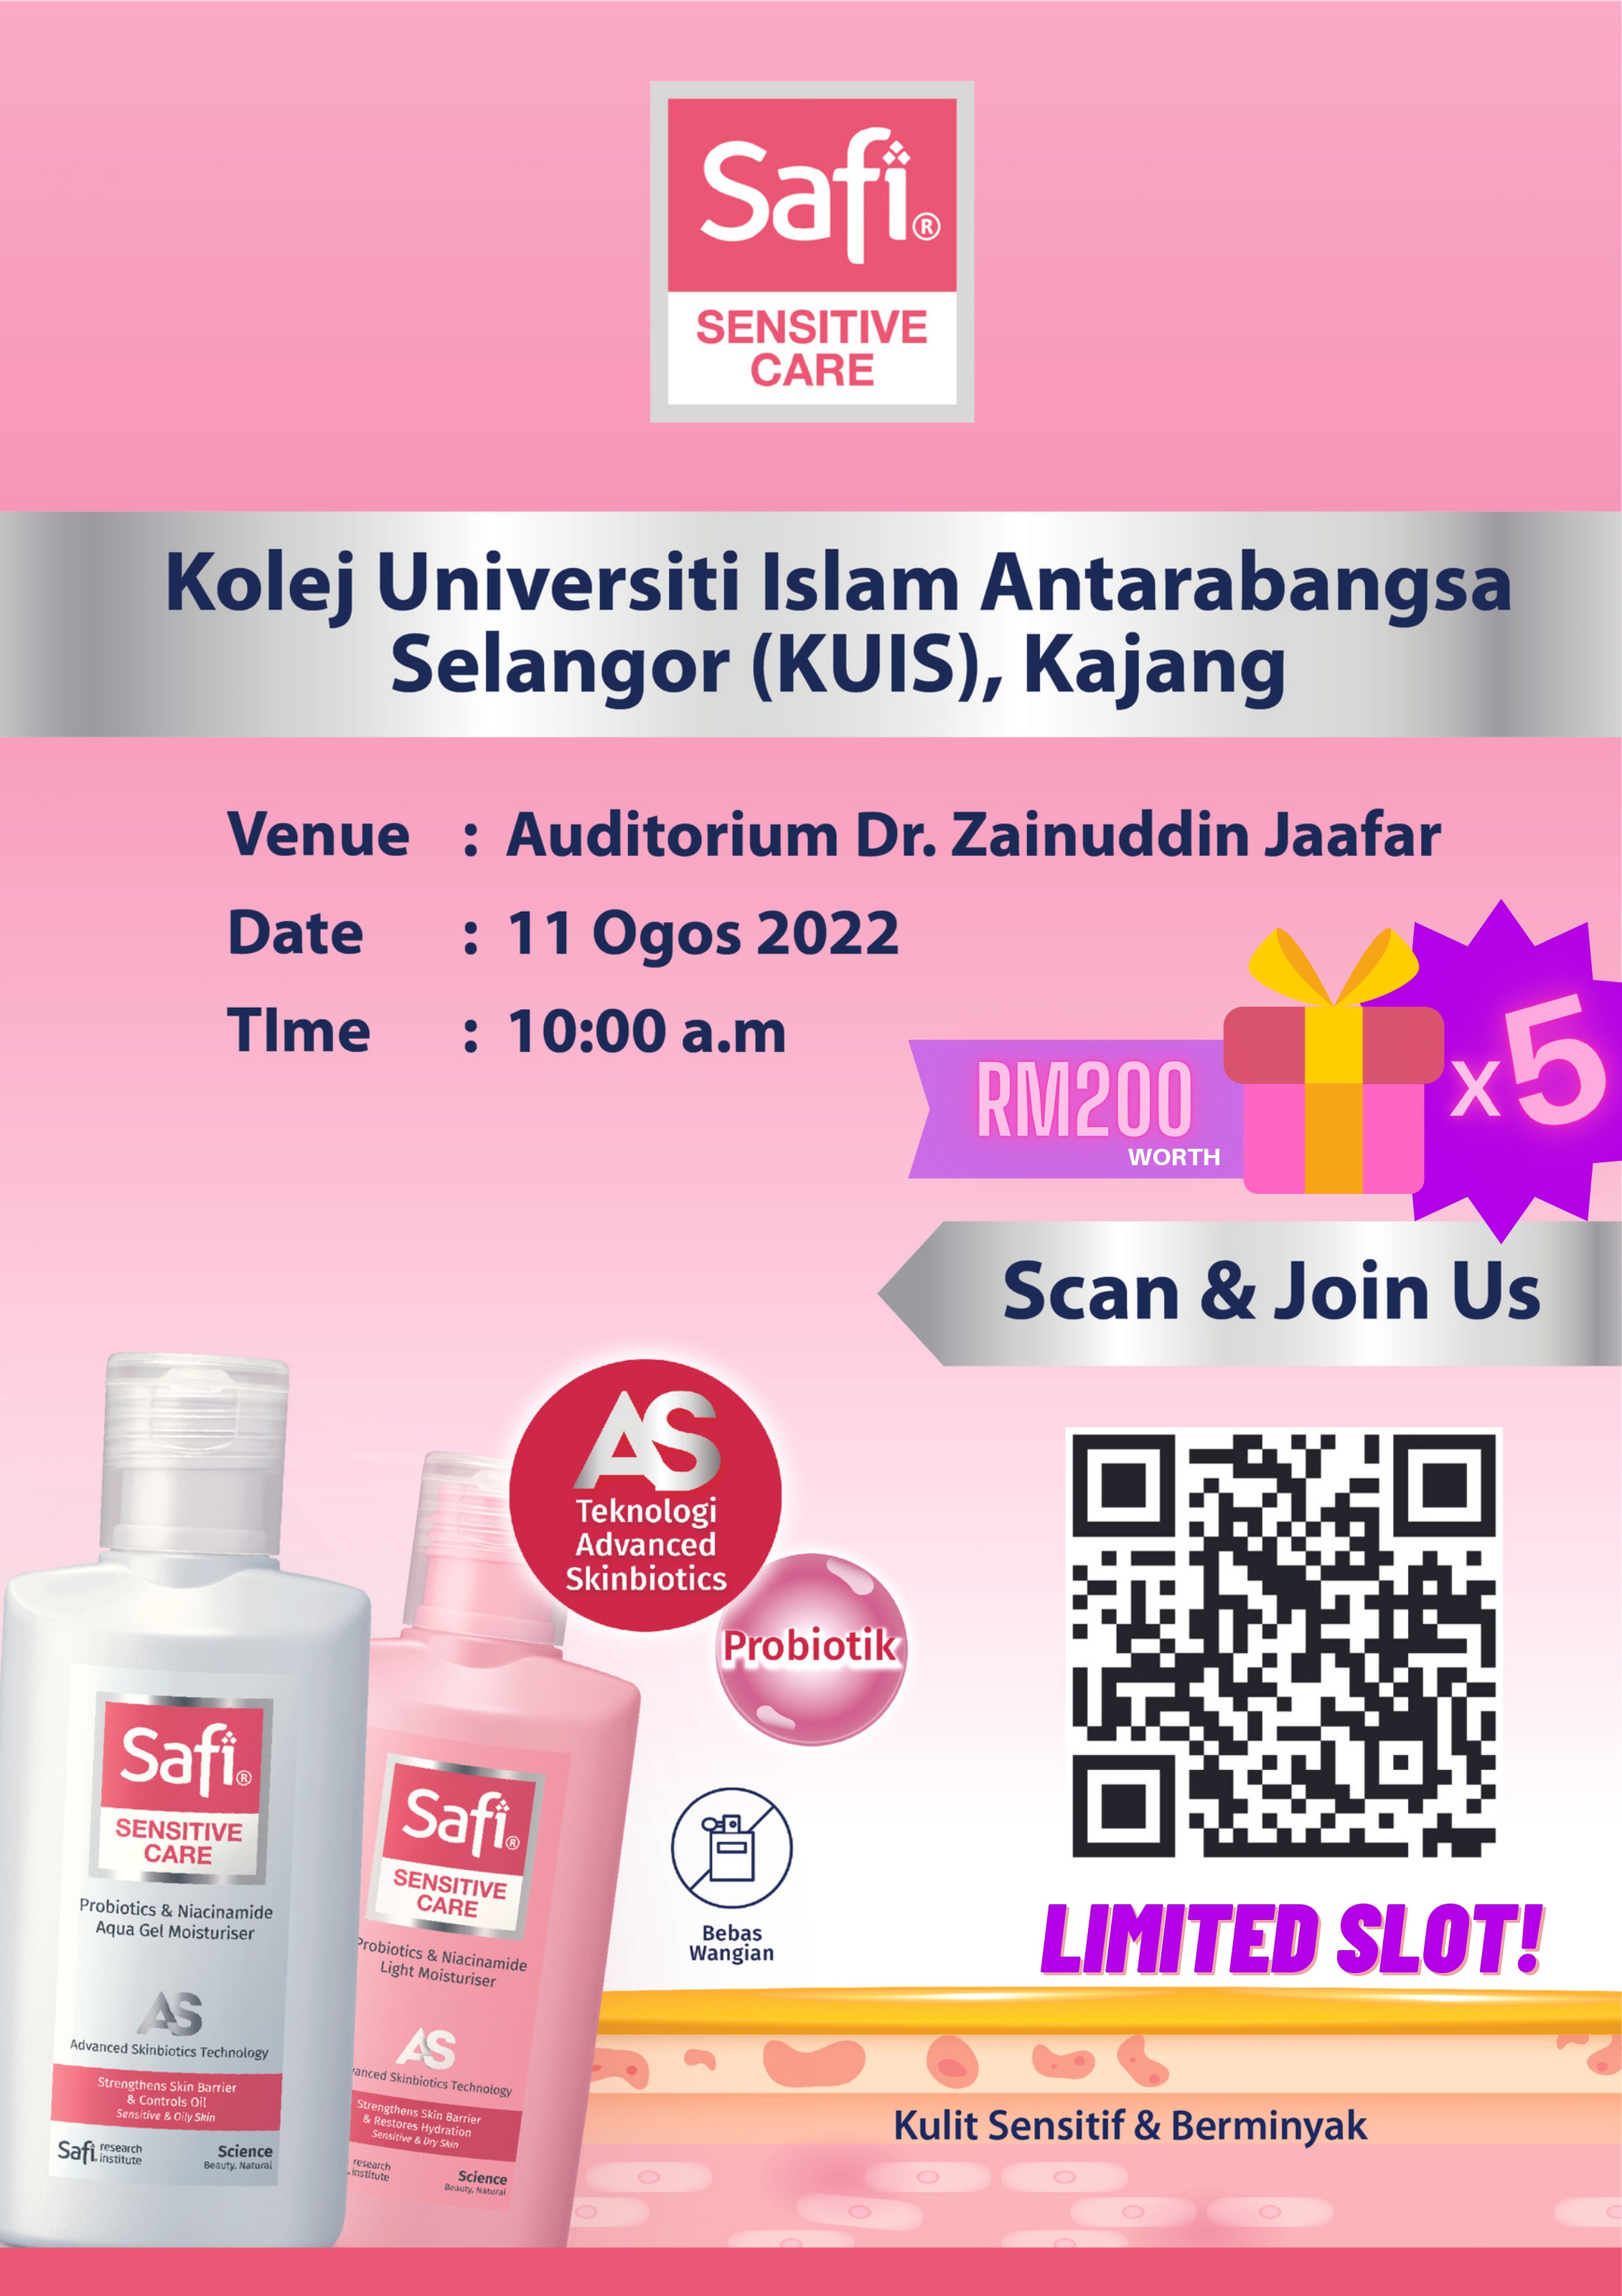 Come join the Safi Sensitive Care Talk and stand a chance to win RM200 Worth of Safi Products!